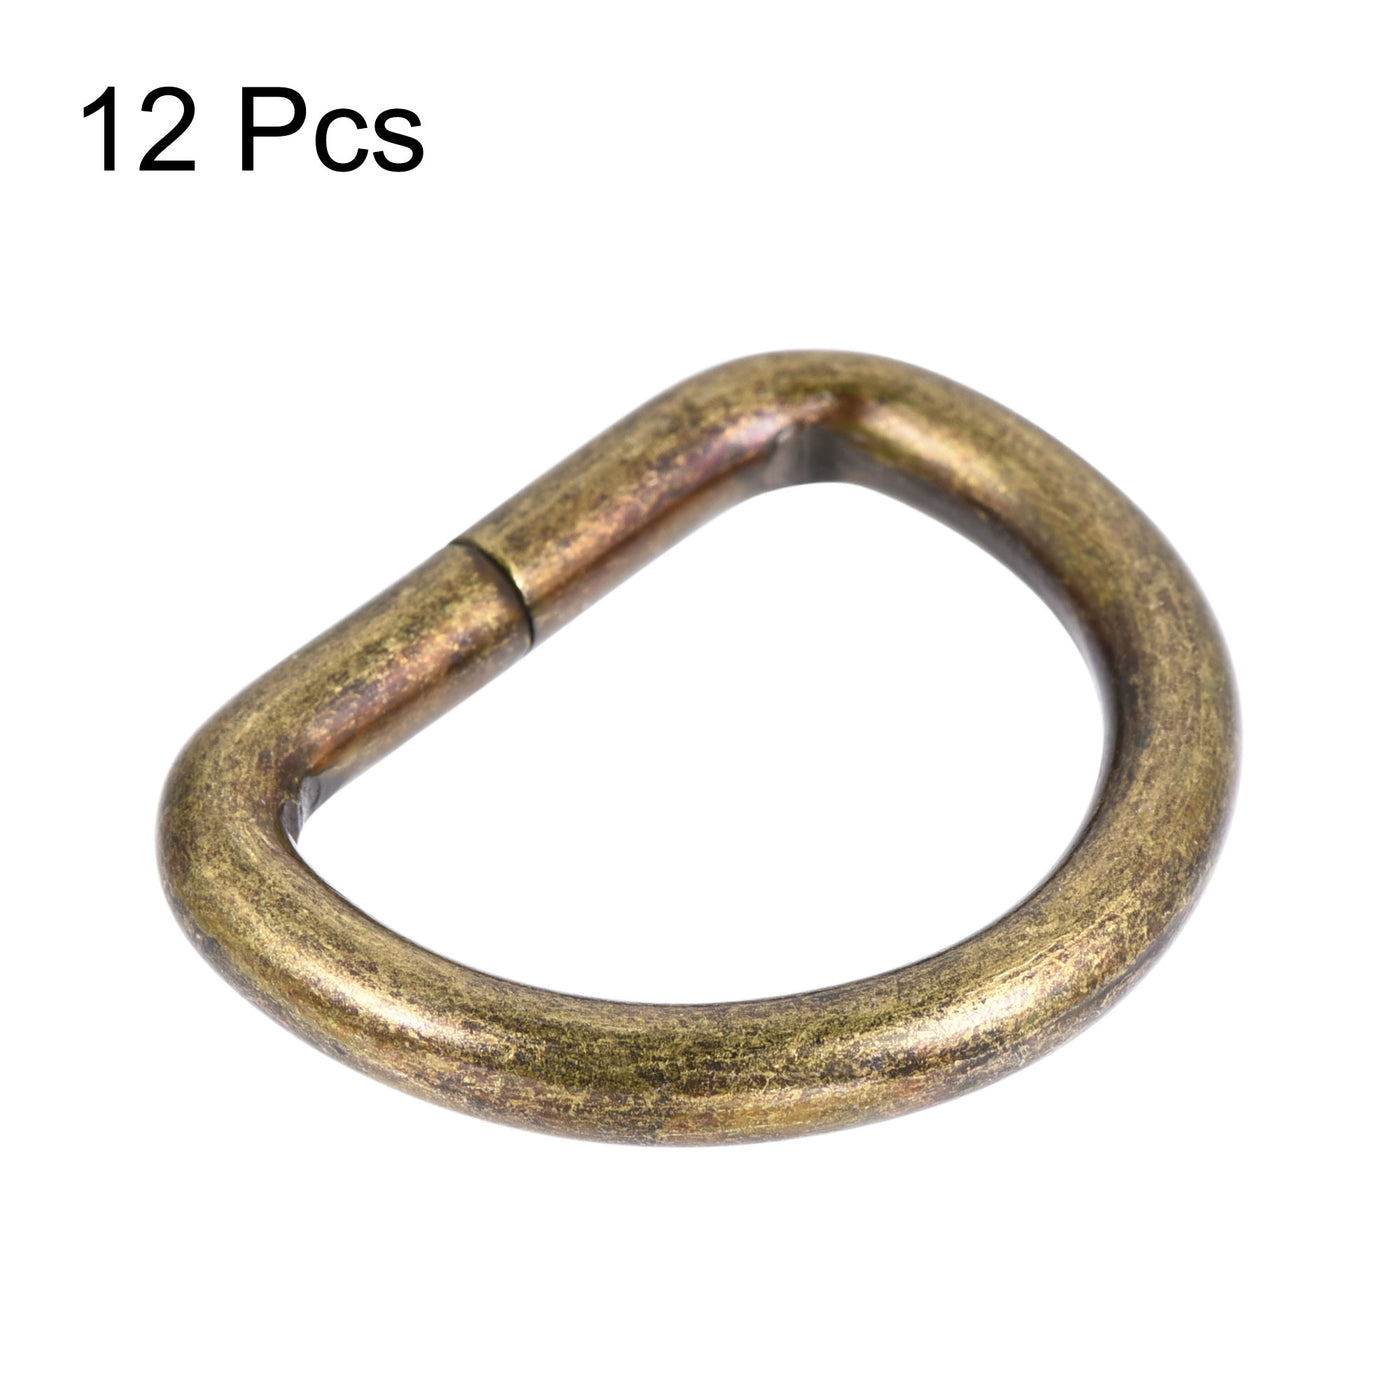 uxcell Uxcell Metal D Ring 0.98"(25mm) D-Rings Buckle for Hardware Bags Belts Craft DIY Accessories Bronze Tone 12pcs